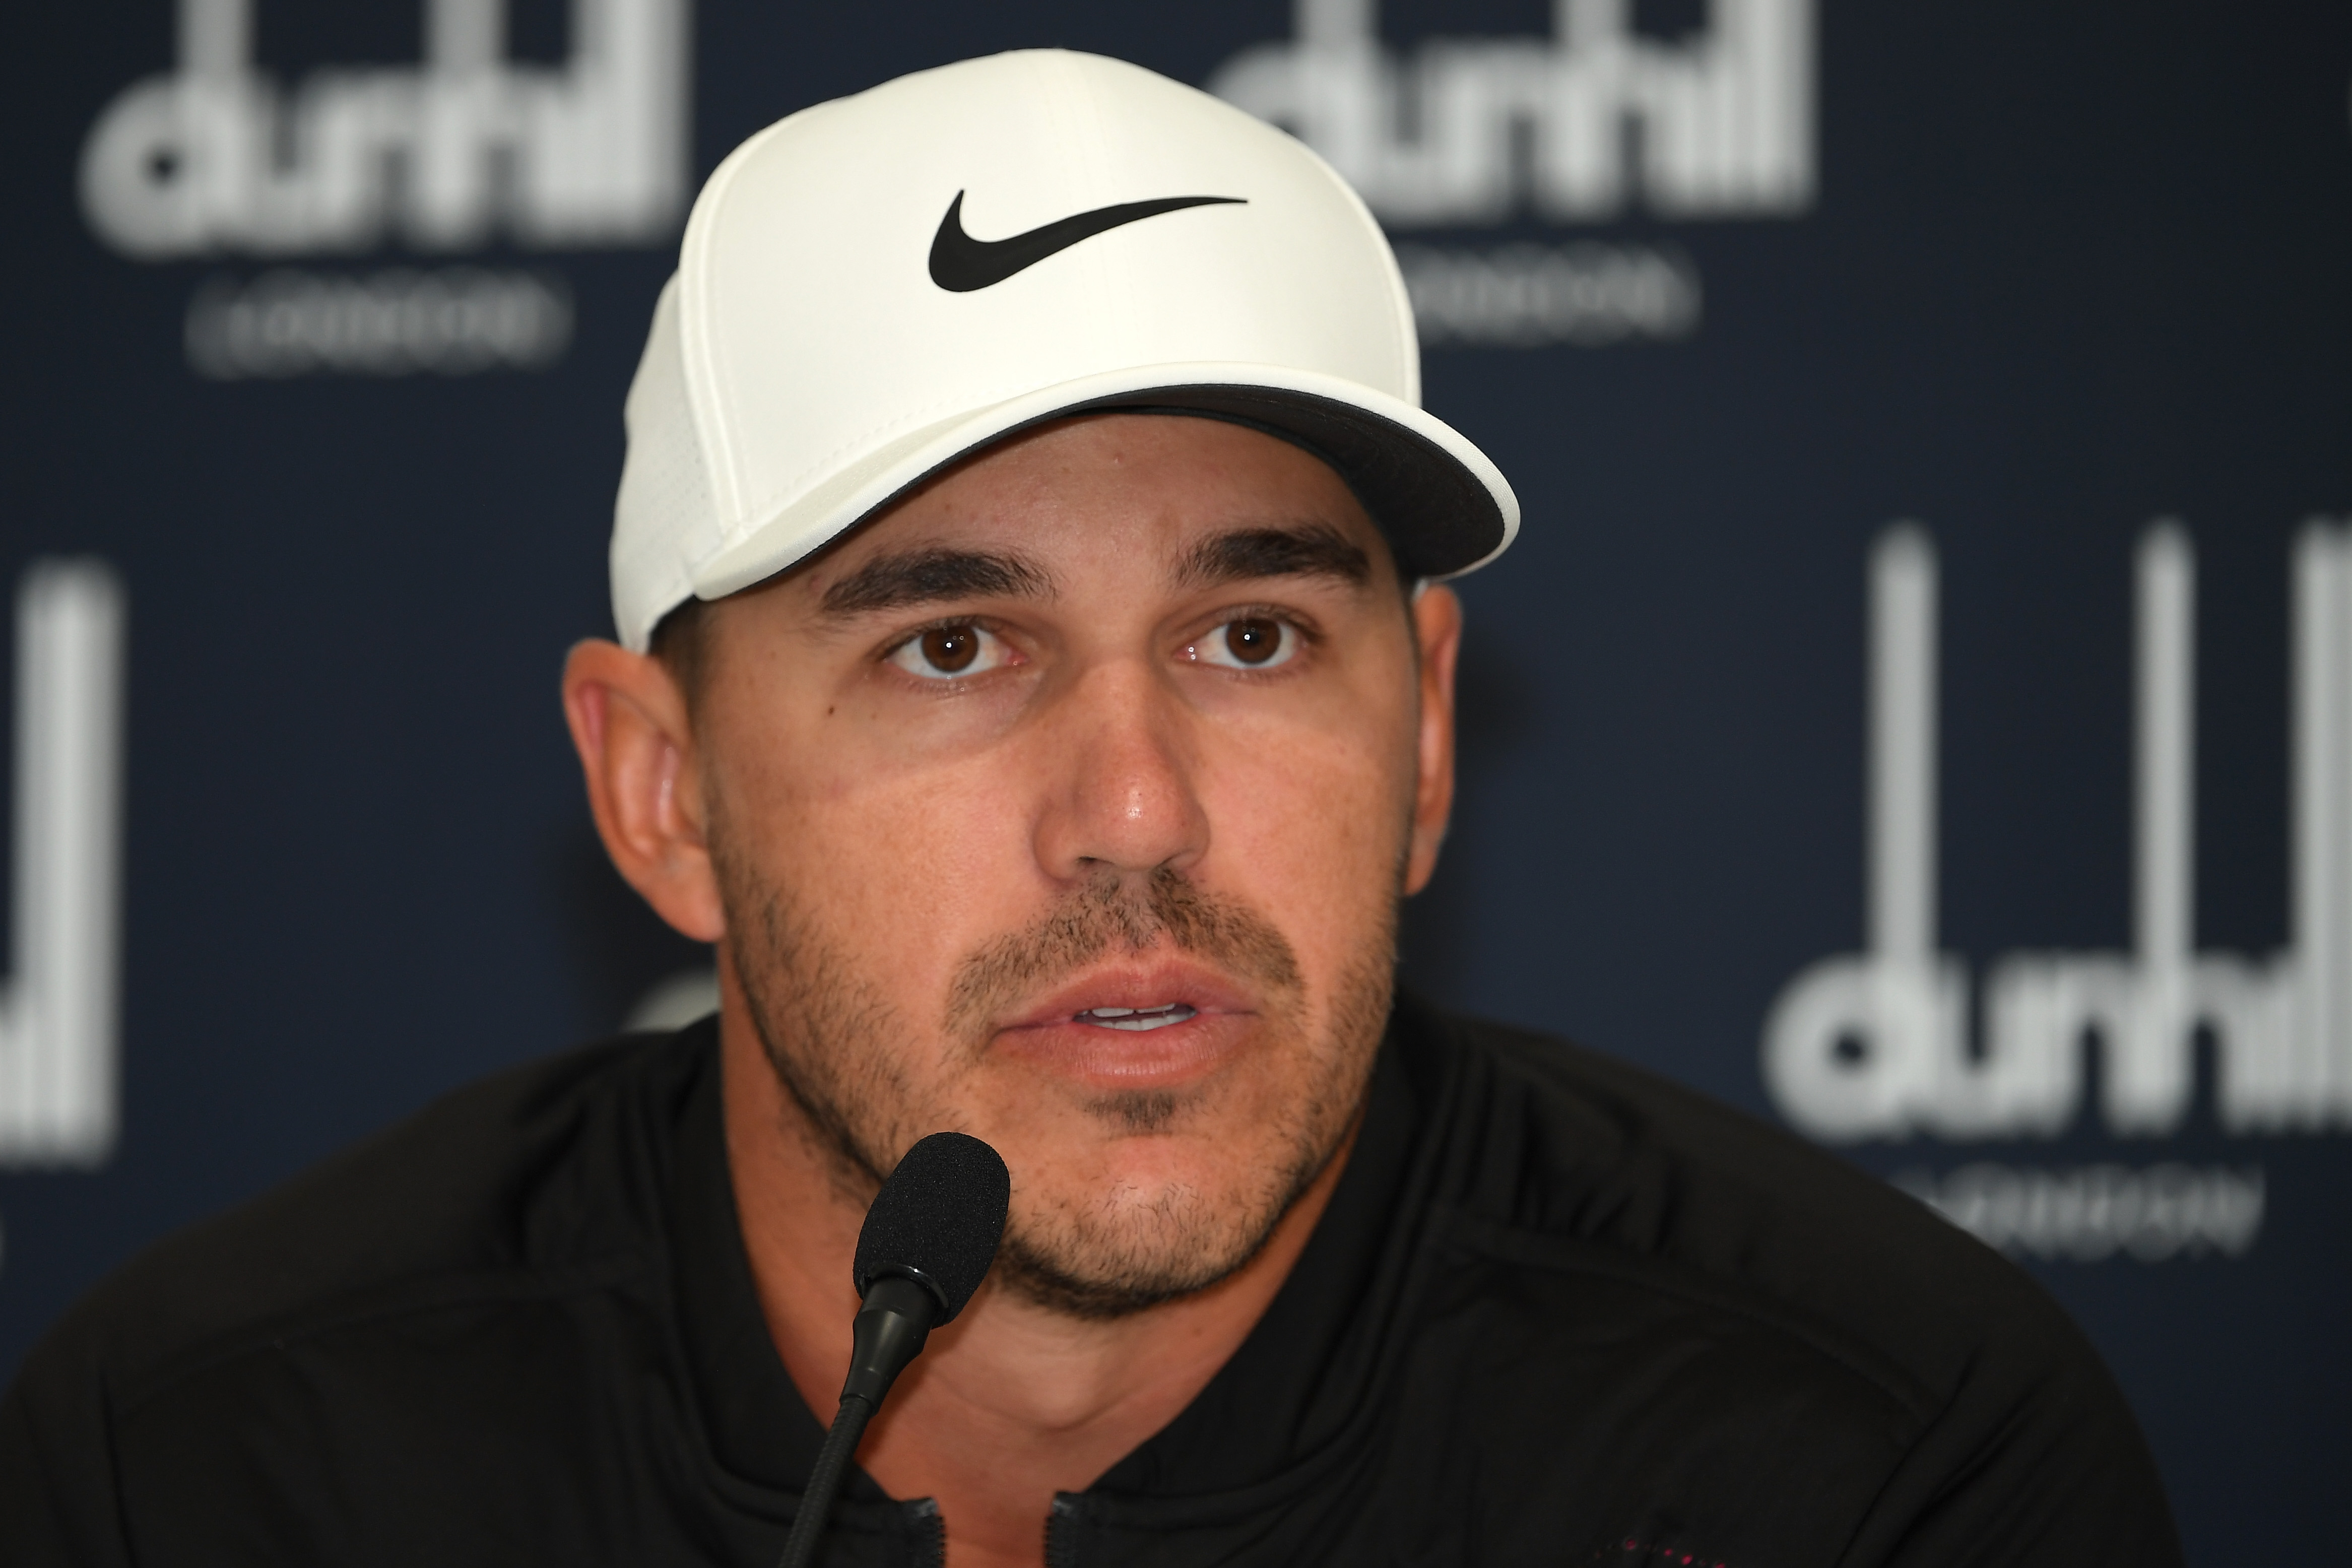 Brooks Koepka denies he and Dustin Johnson came to blows at Ryder Cup